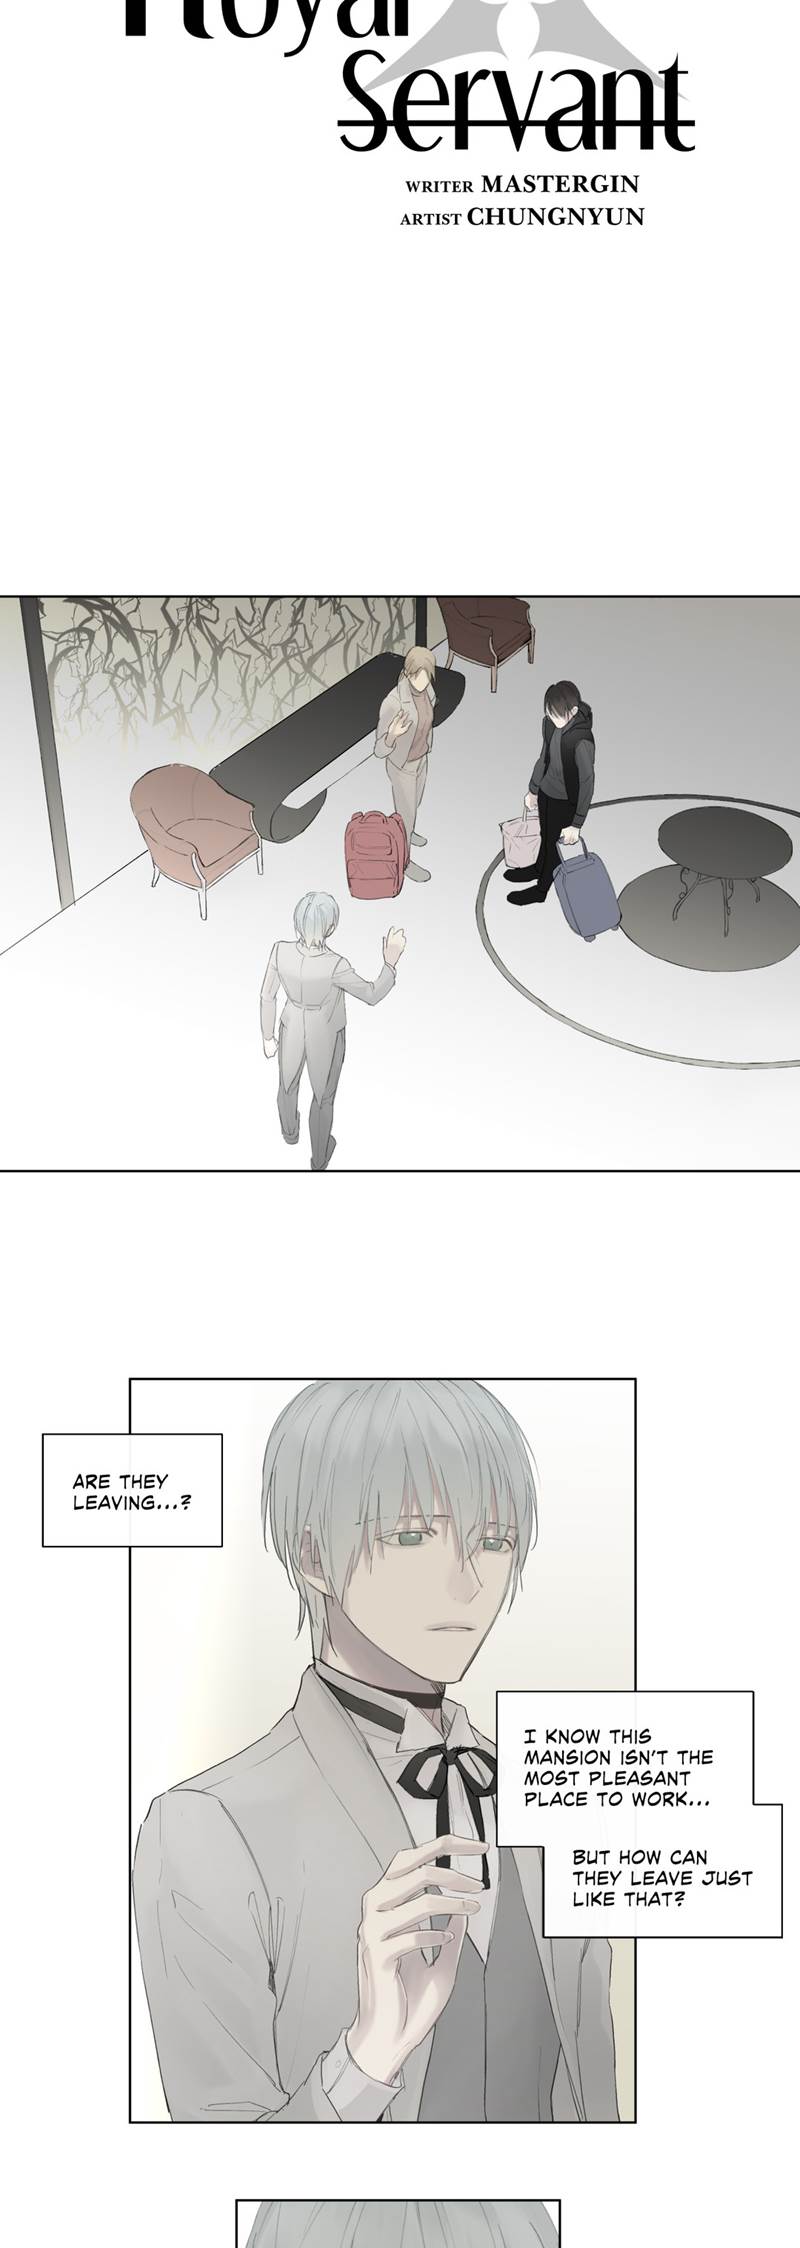 Royal Servant - Chapter 35 Page 3